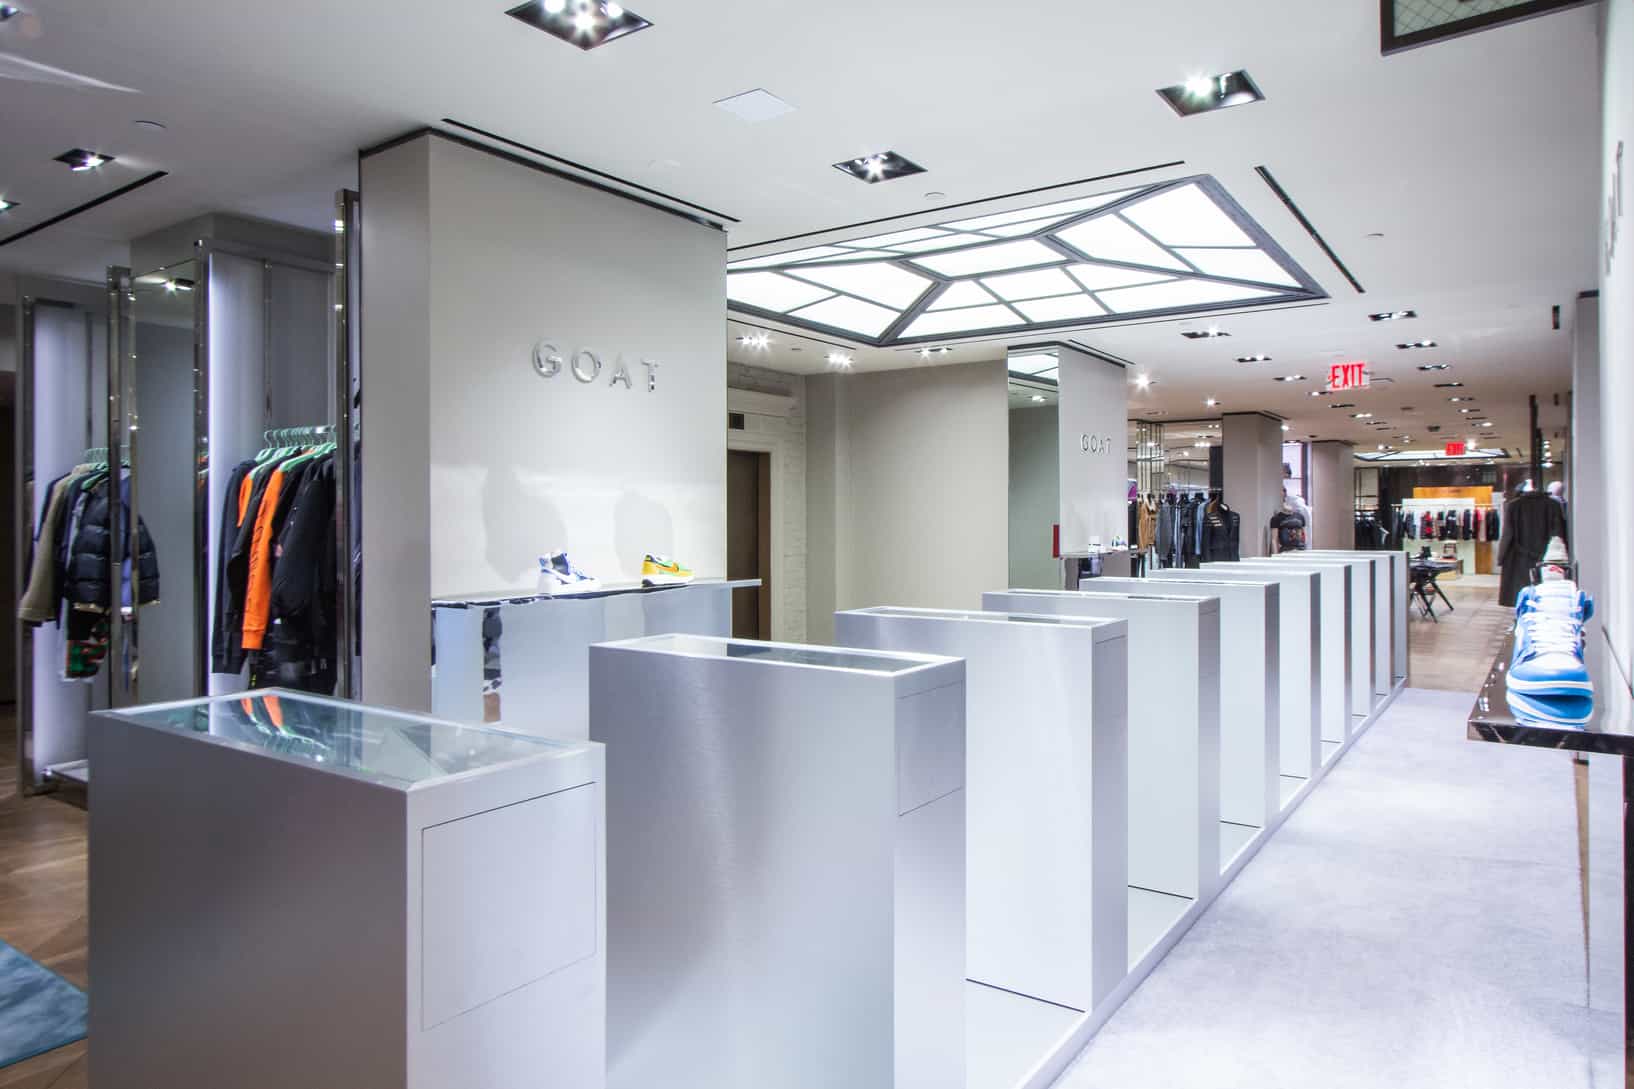 Bergdorf Goodman Is Stepping Up Its Menswear Game - Racked NY